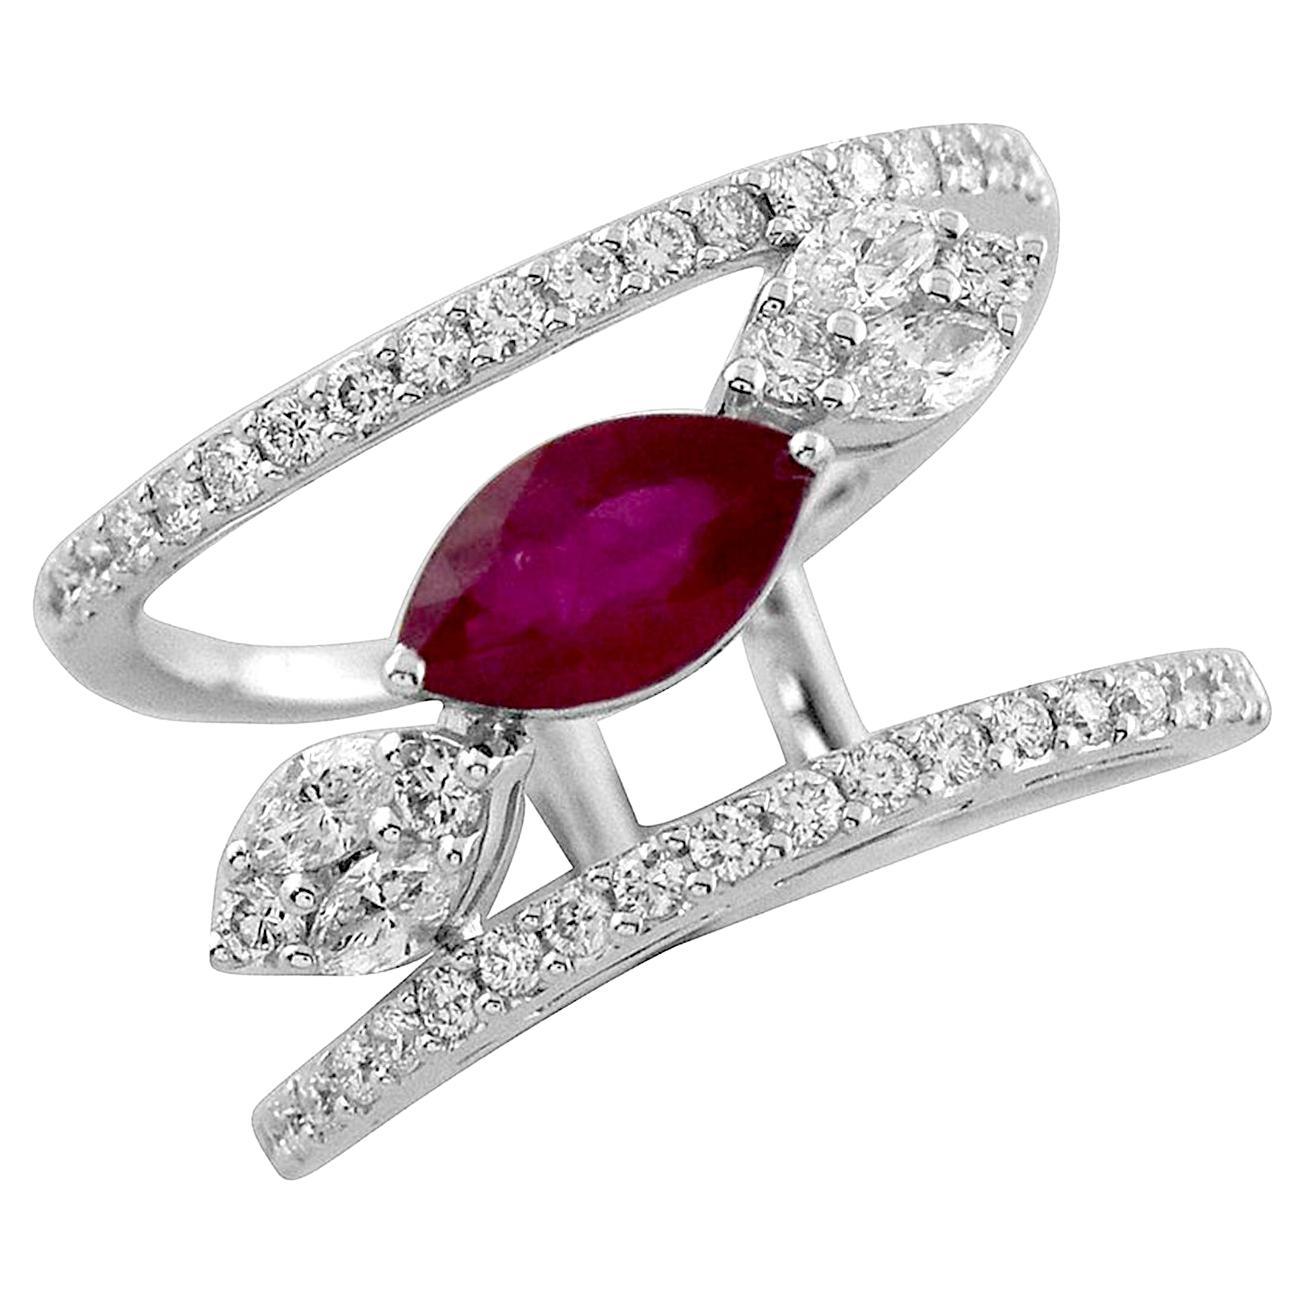 1.03 Ct Marquise Shaped Ruby Wide Ring With Diamonds Made In 18k White Gold For Sale